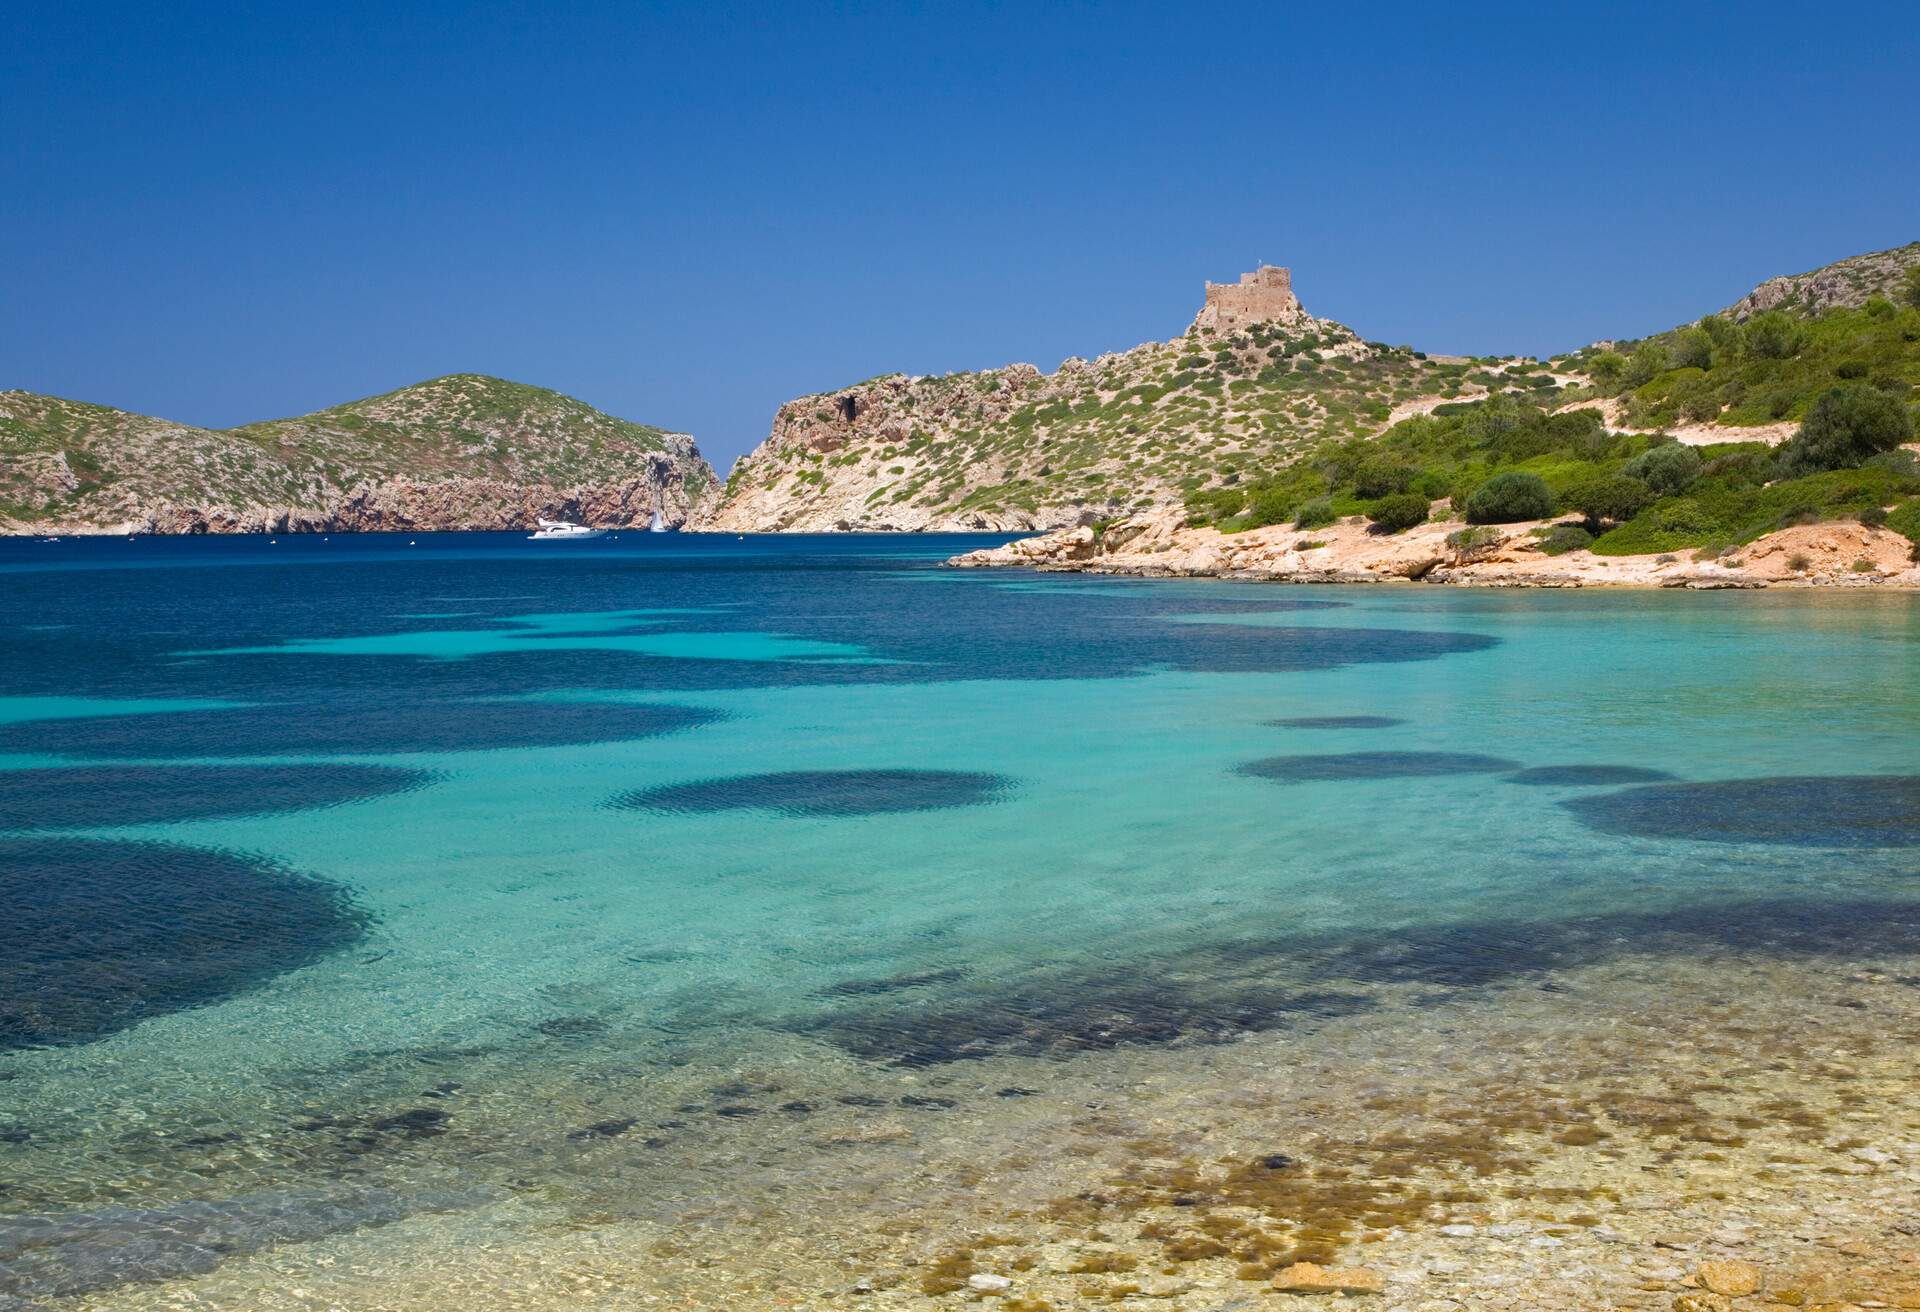 Lying ten miles off the coast of south-eastern Mallorca, the Cabrera archipelago is an area of outstanding natural beauty and ecological importance.